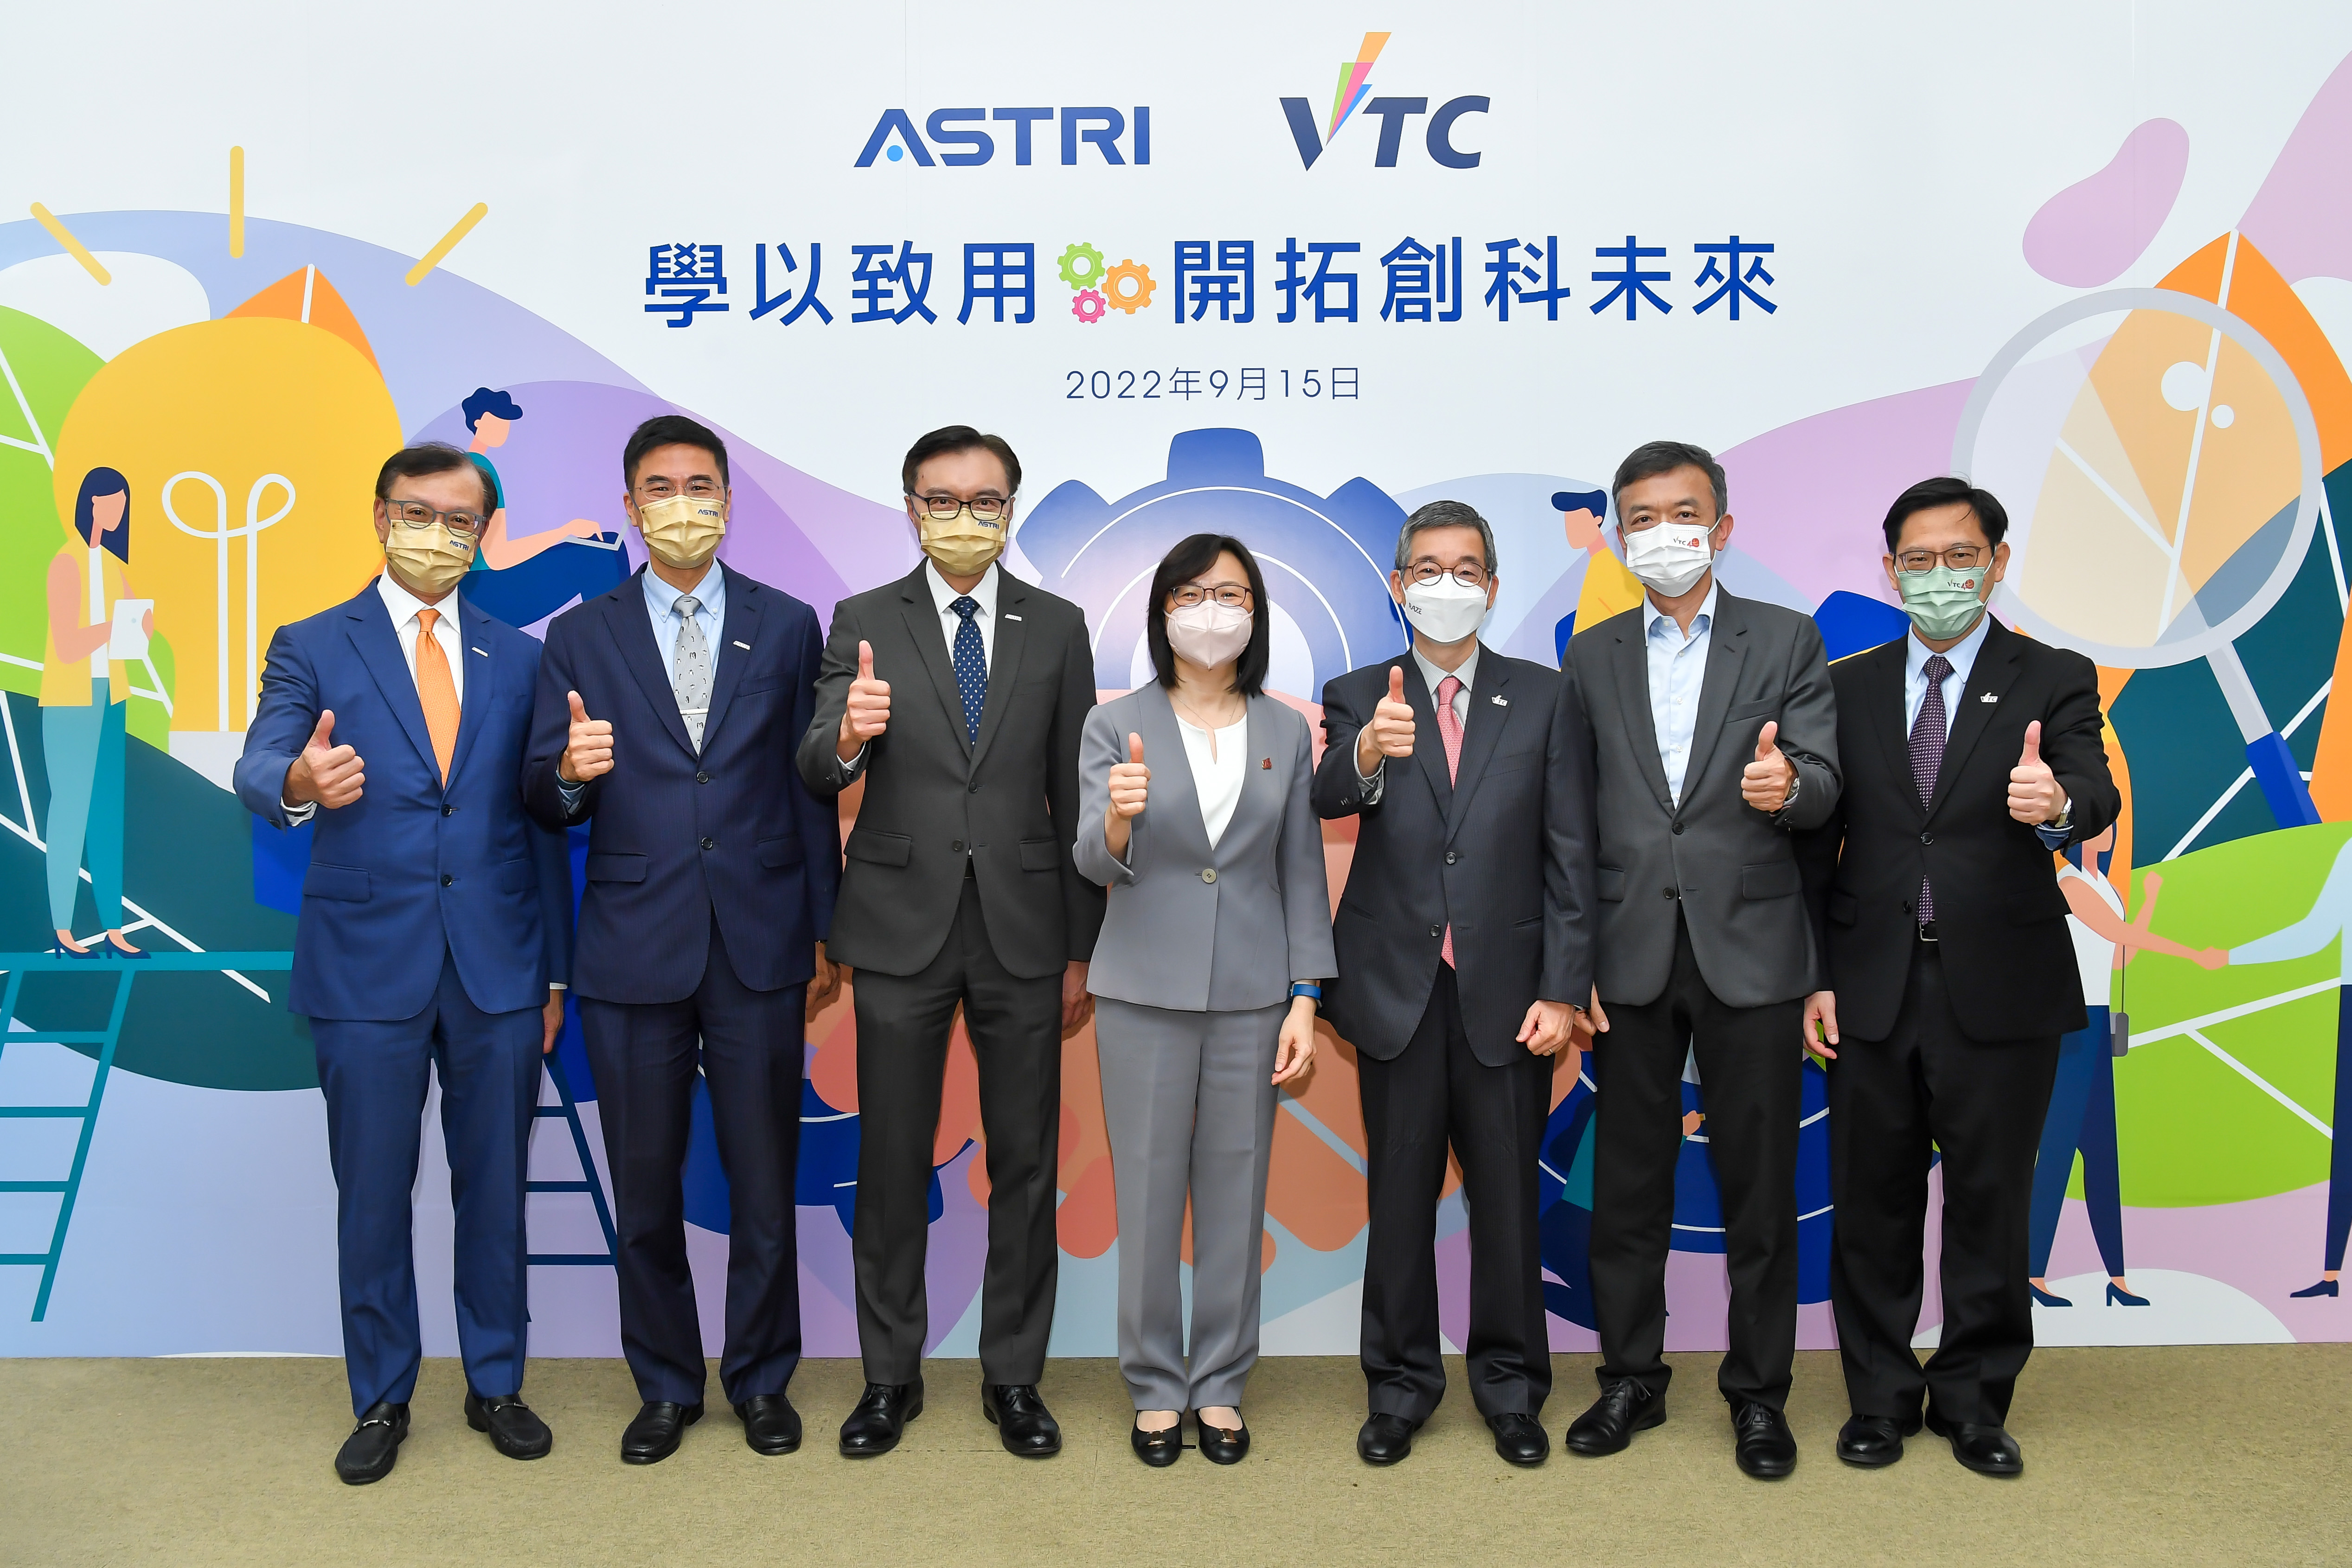 [News from Institutions] ASTRI partners with VTC to groom young R&D talents and launch new programmes on Microelectronics and Communications Technologies